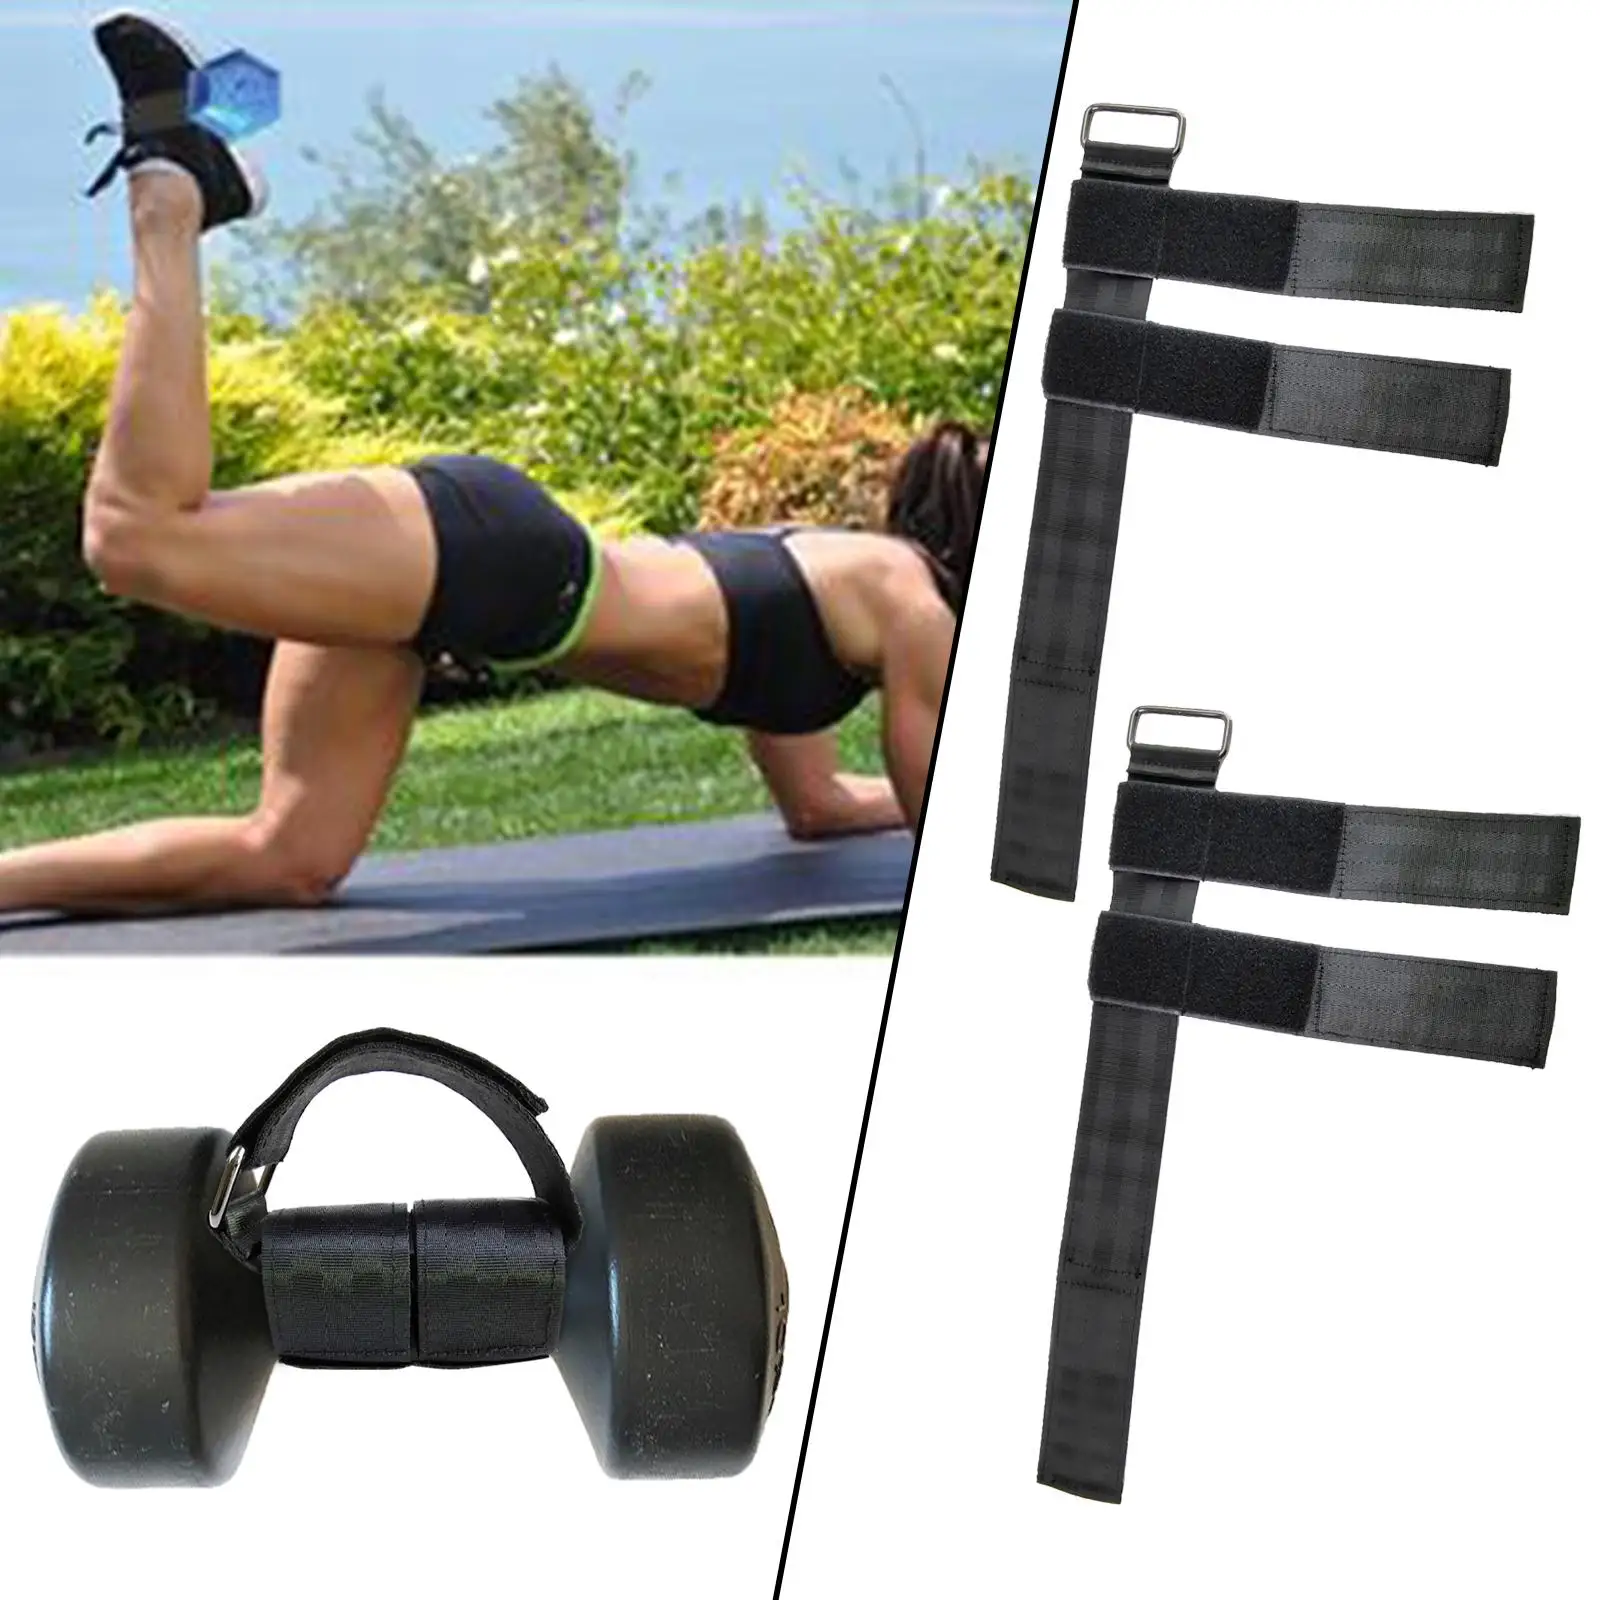 2x D Ring Ankle Glute Workouts Leg Pulley Strap Tibialis Trainer Kickbacks Thigh